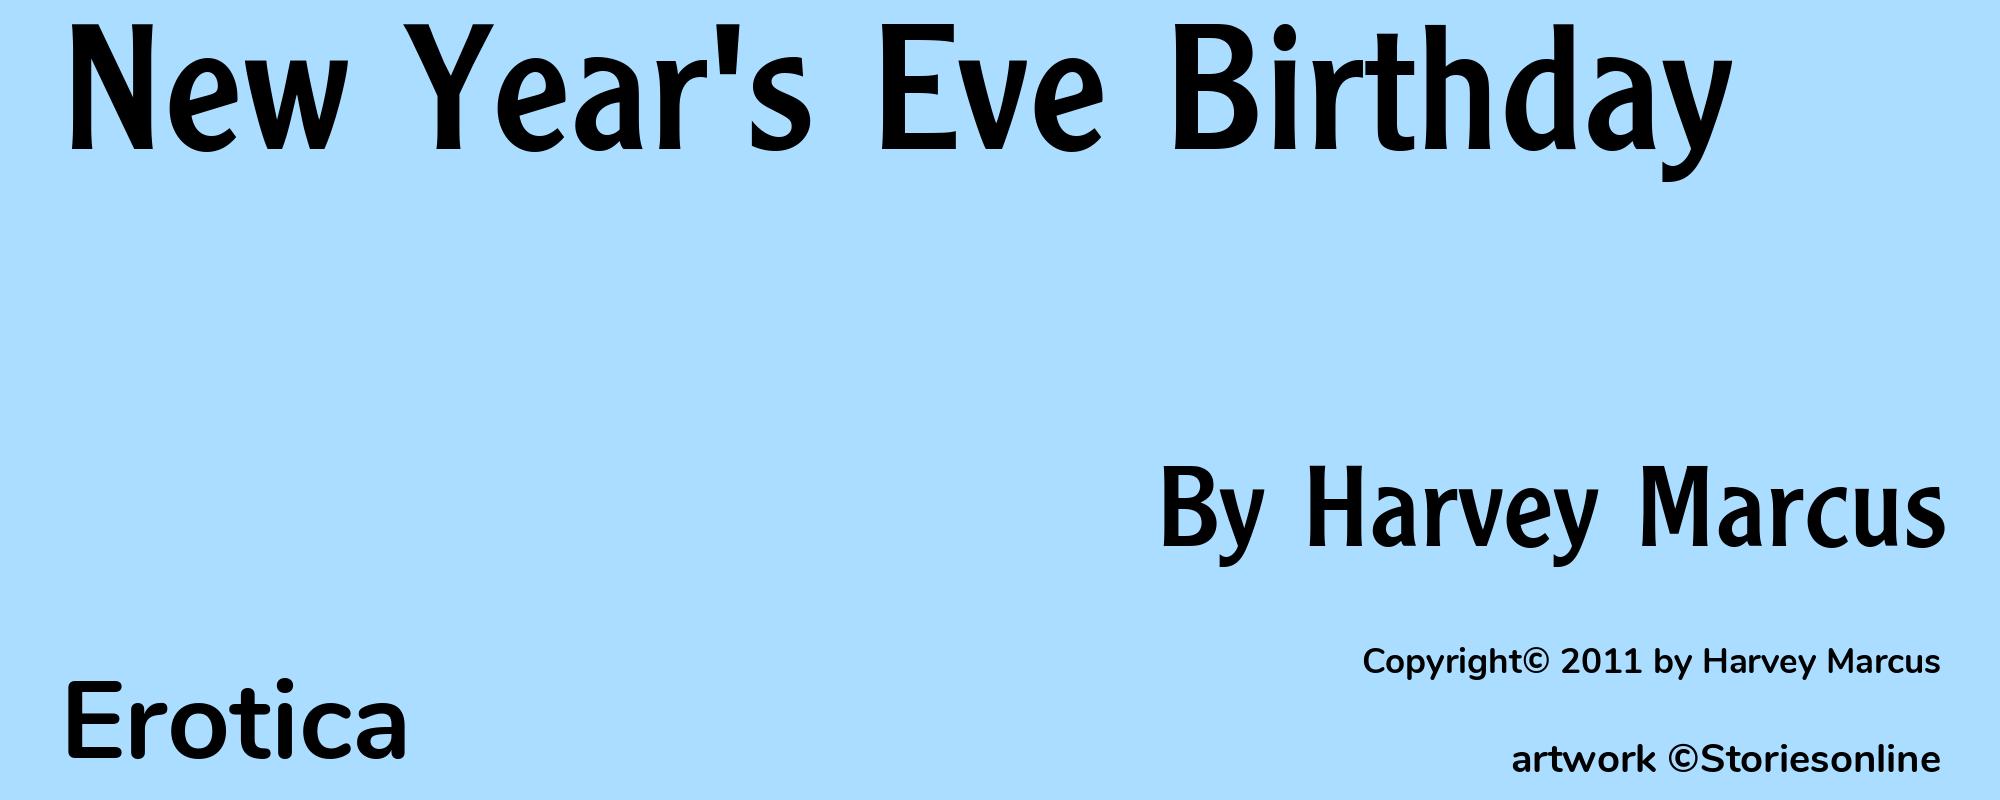 New Year's Eve Birthday - Cover